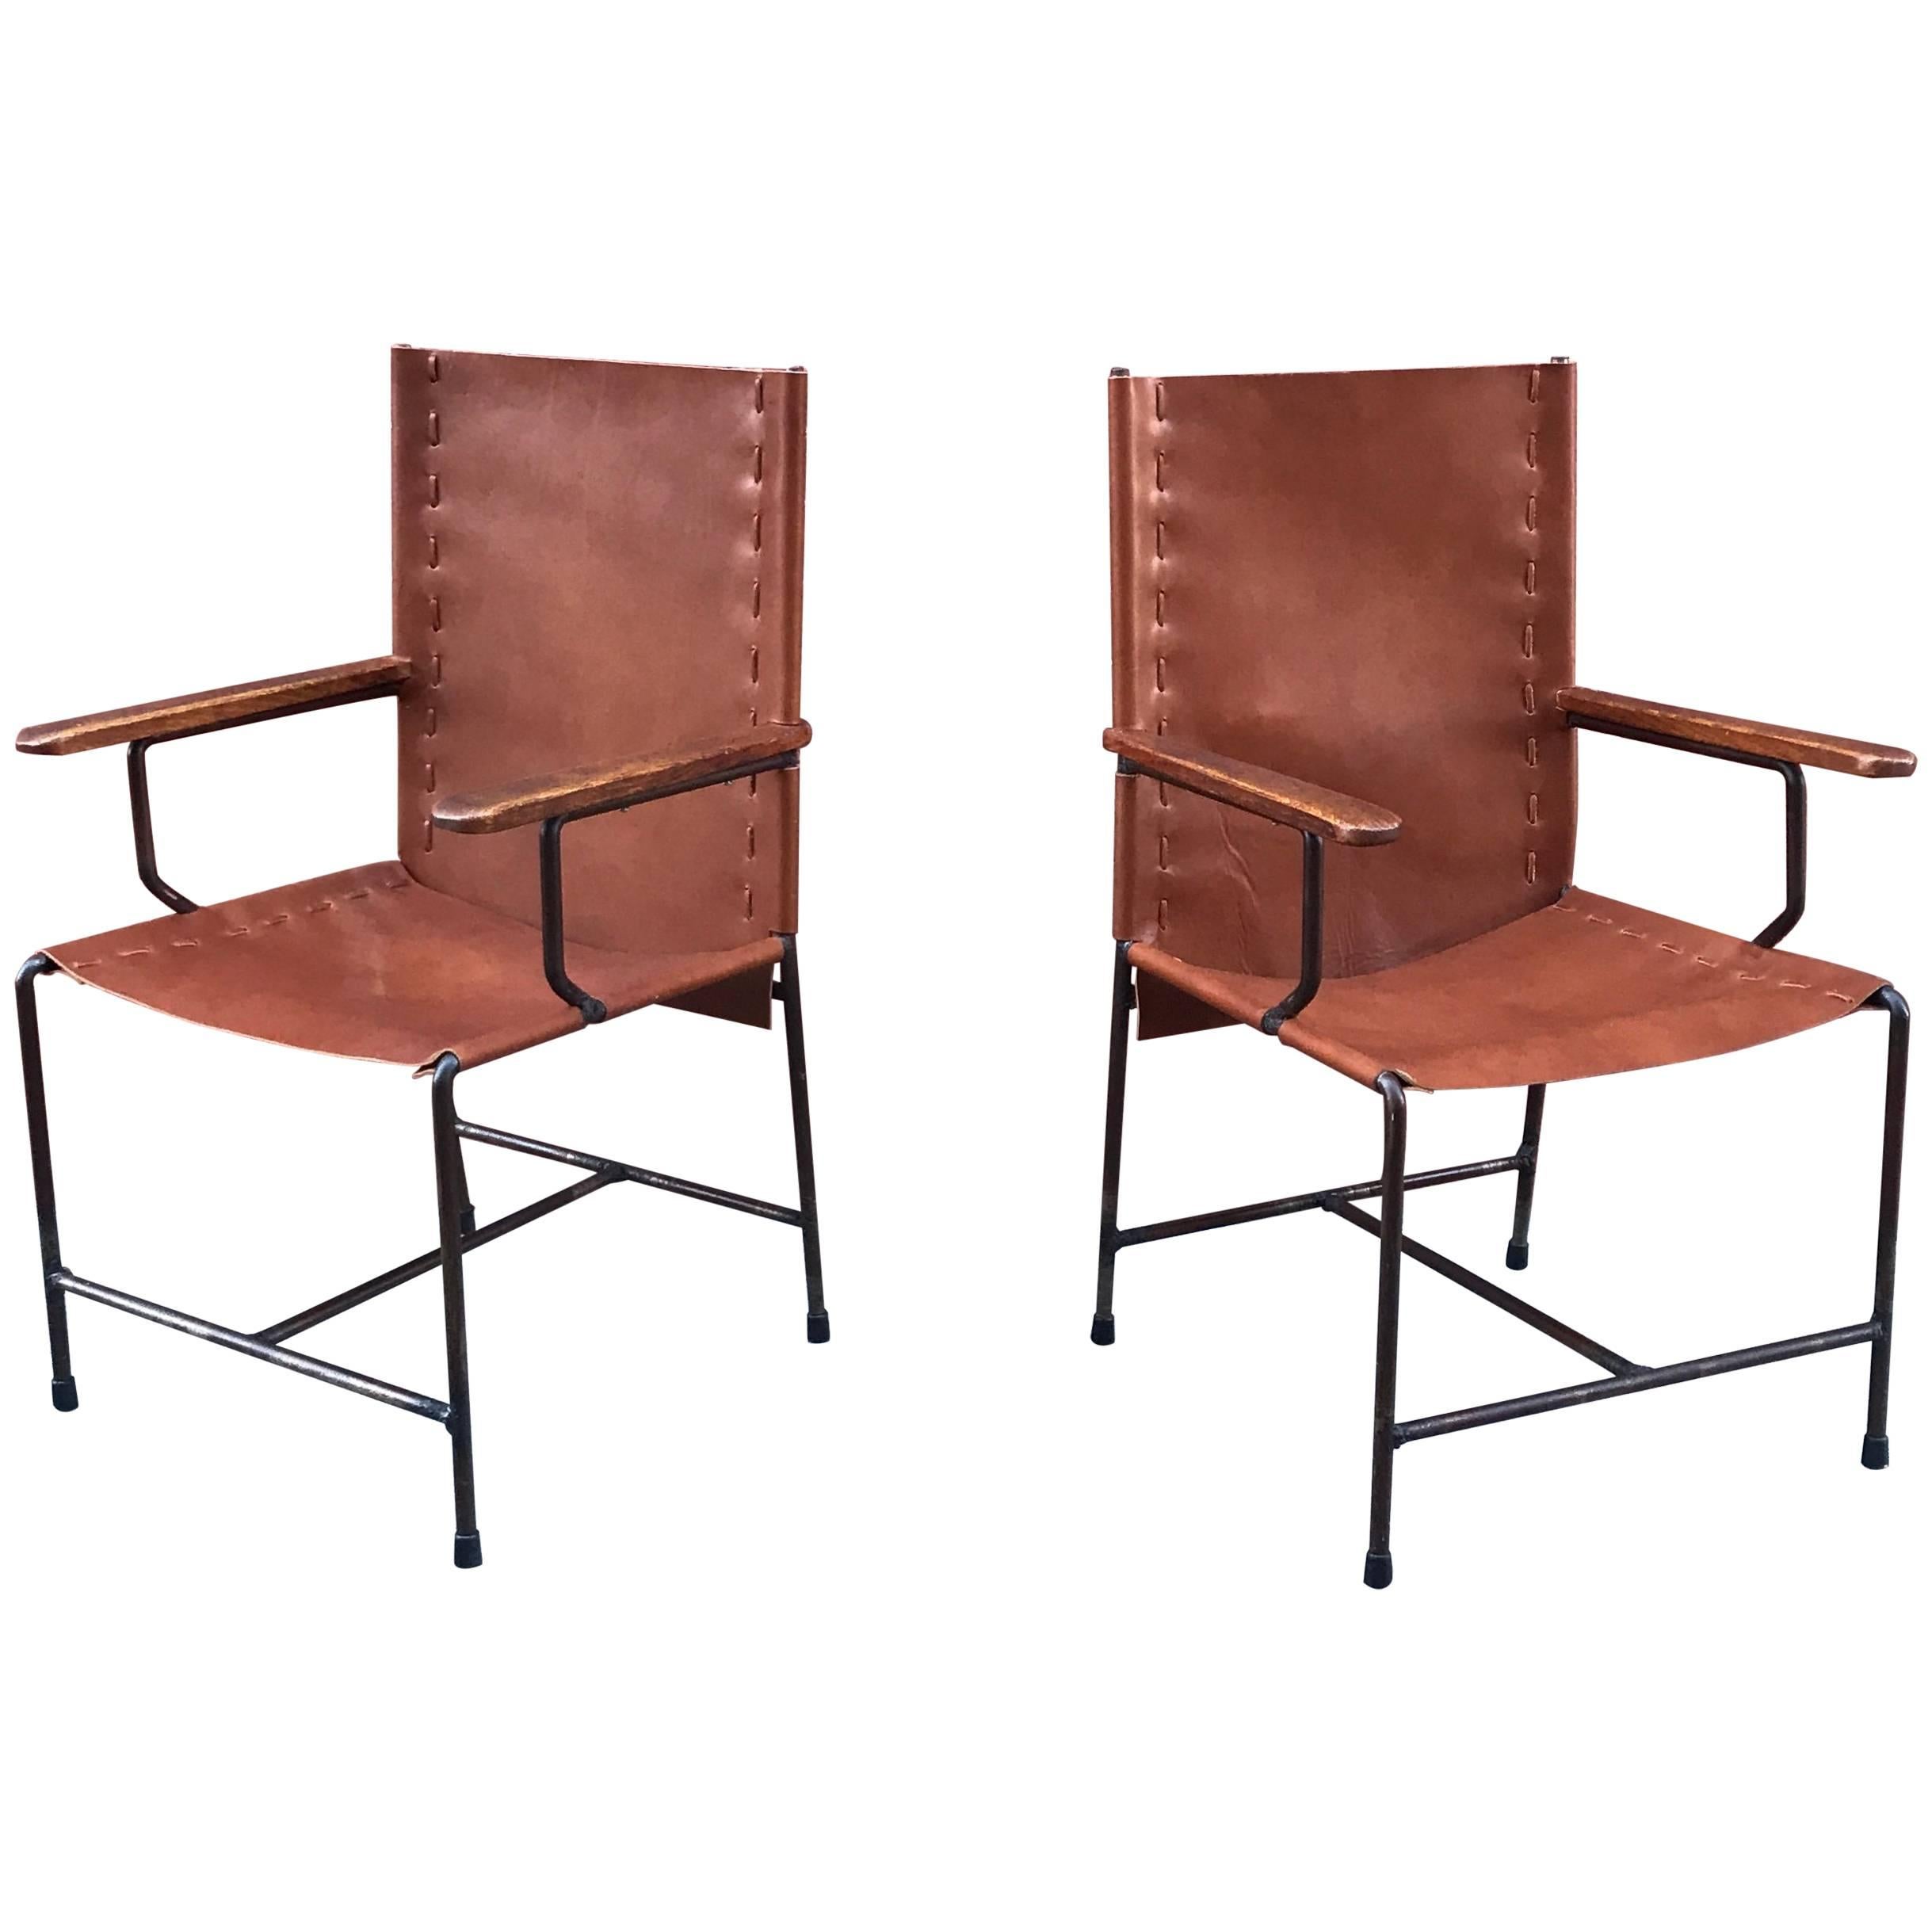 Pair of Mexican Modern Armchairs in Iron and Leather, circa 1950s For Sale